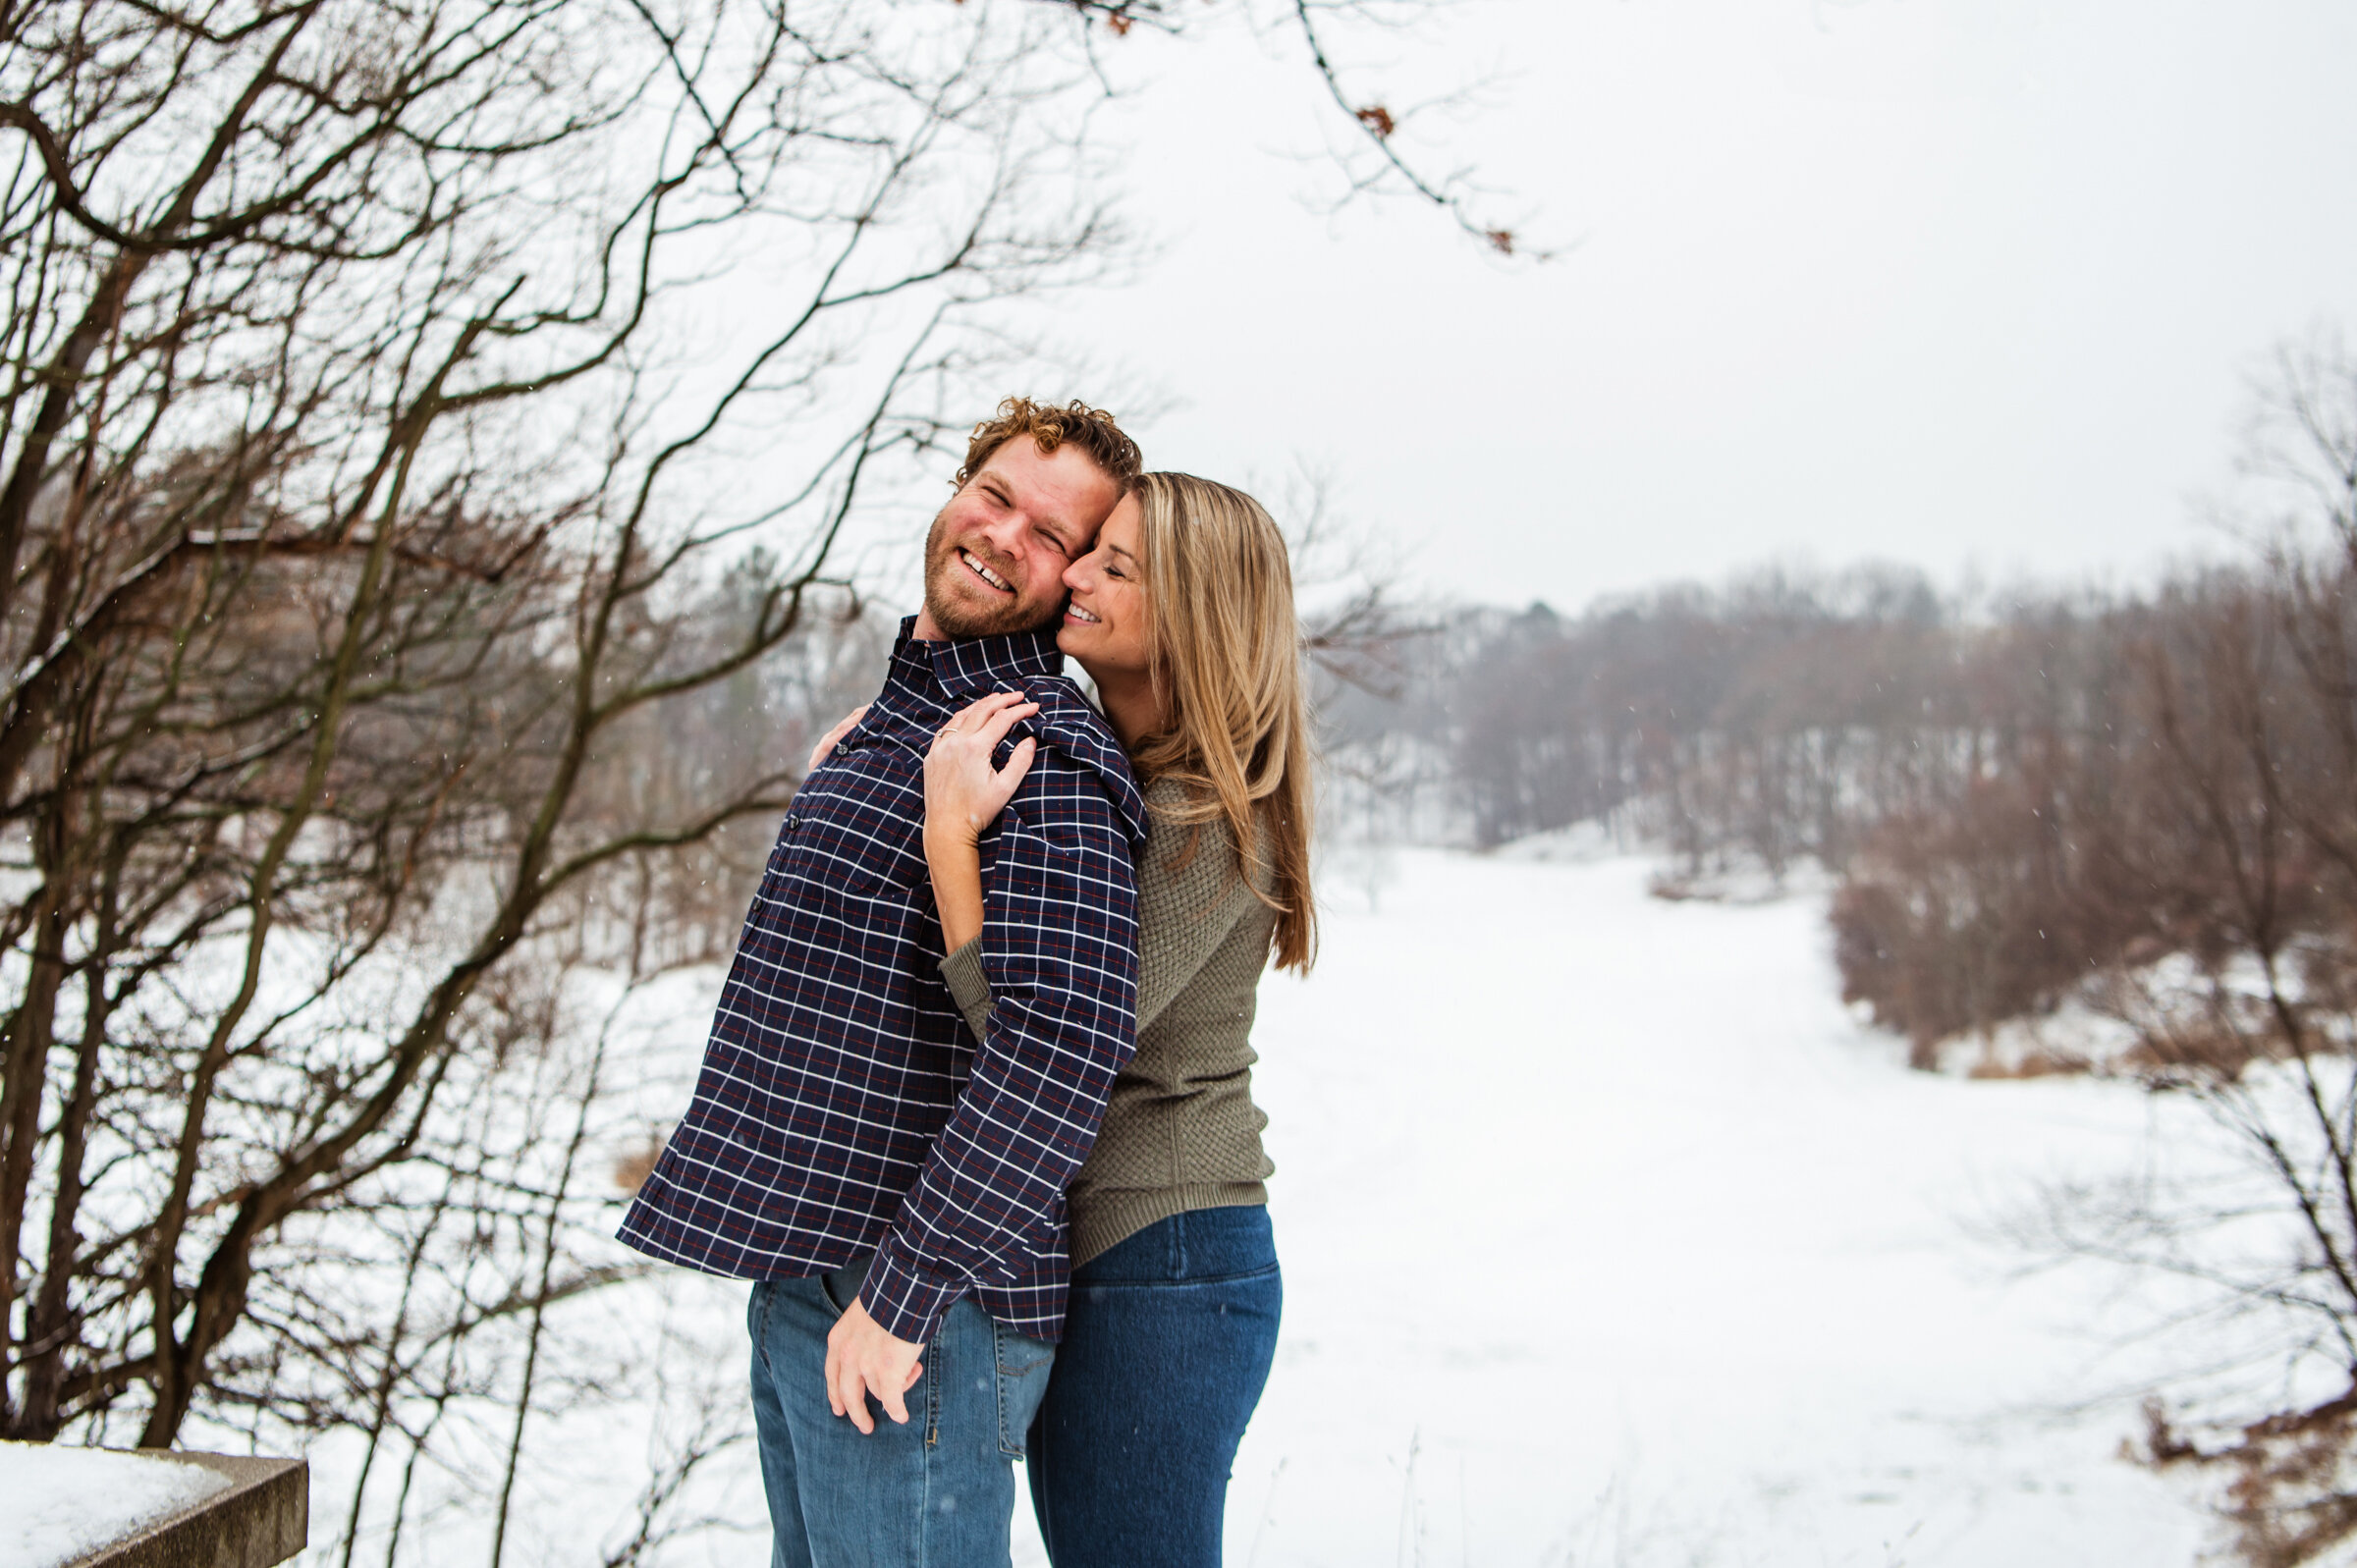 Irondequoit_Beer_Company_Durand_Eastman_Park_Rochester_Engagement_Session_JILL_STUDIO_Rochester_NY_Photographer_7117.jpg